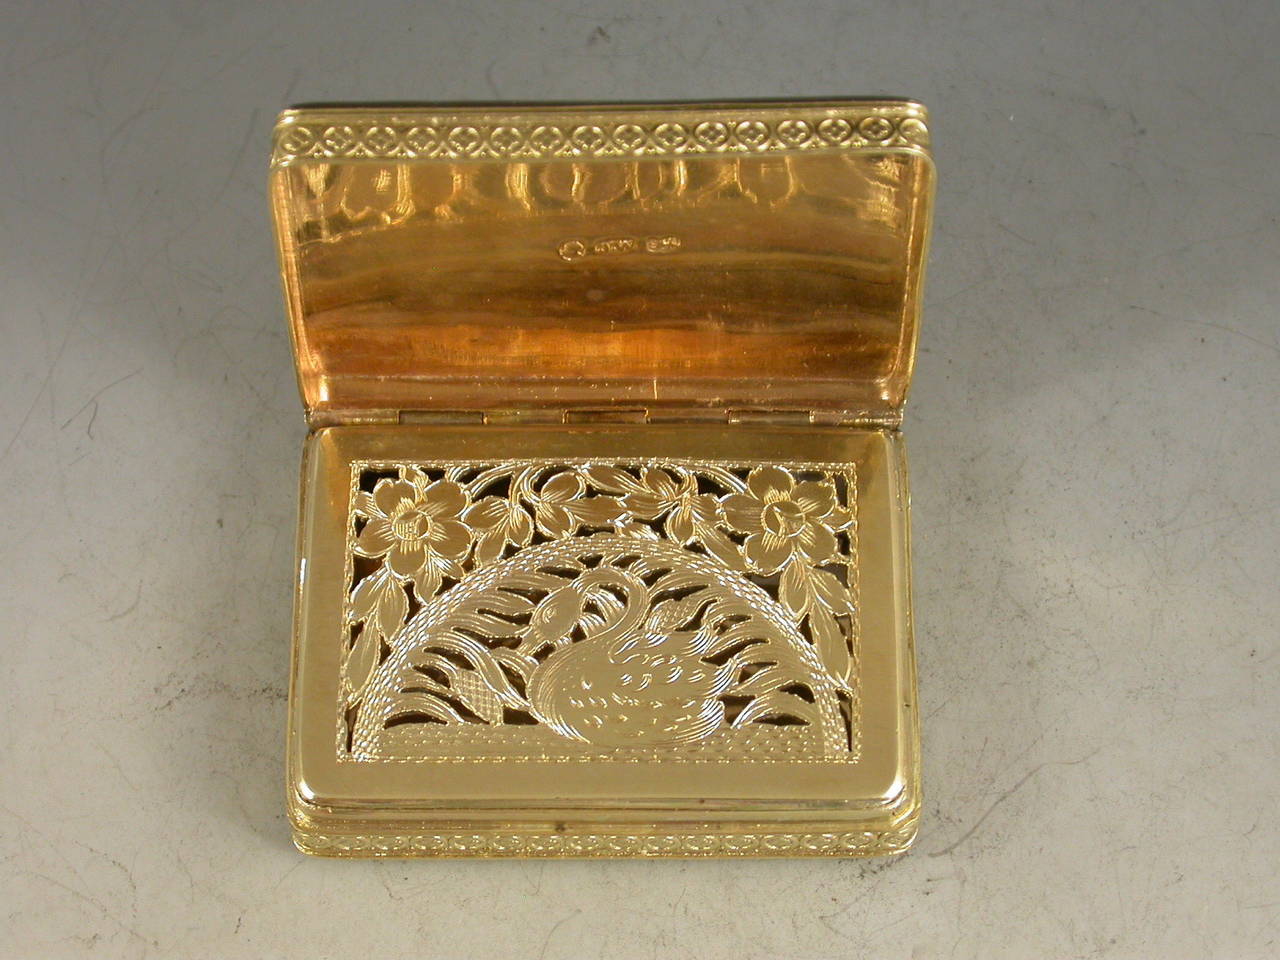 19th Century George III Silver Gilt 'Shepherd Boy' Vinaigrette Box with Swan Decorated Grille